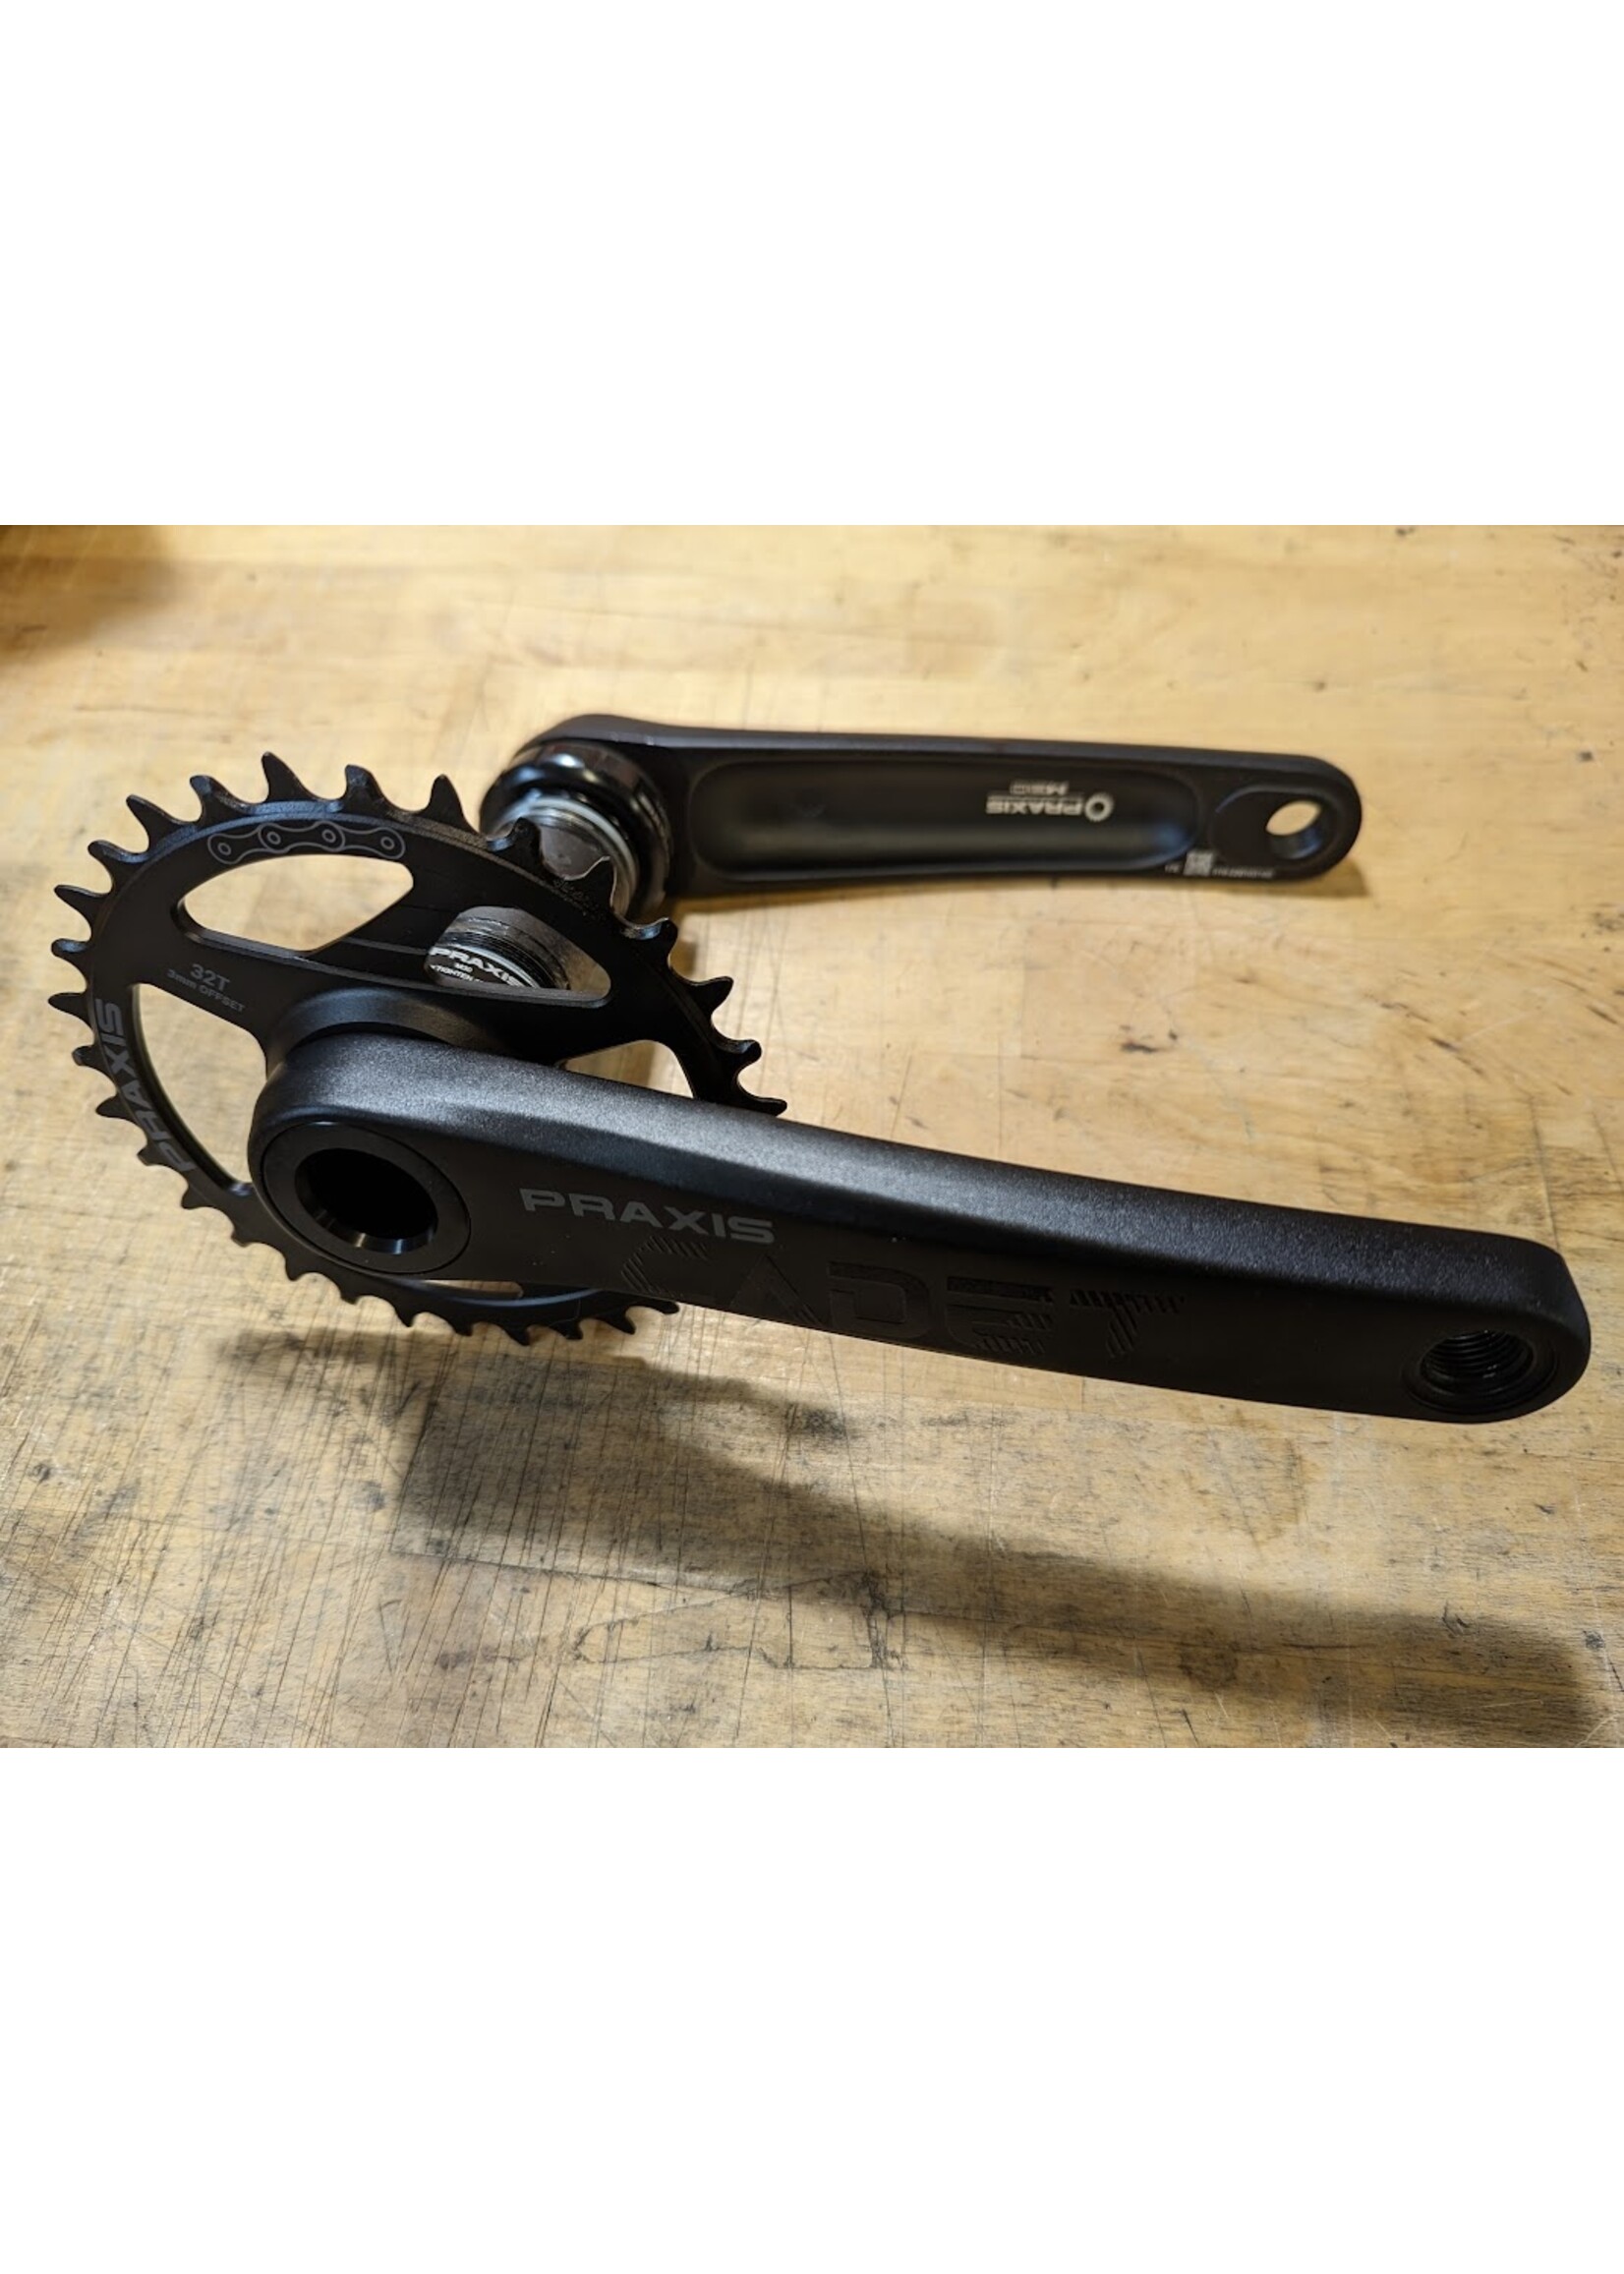 PRAXIS Cadet 175mm M30 Crankset. With BB and 32t ring. *RT